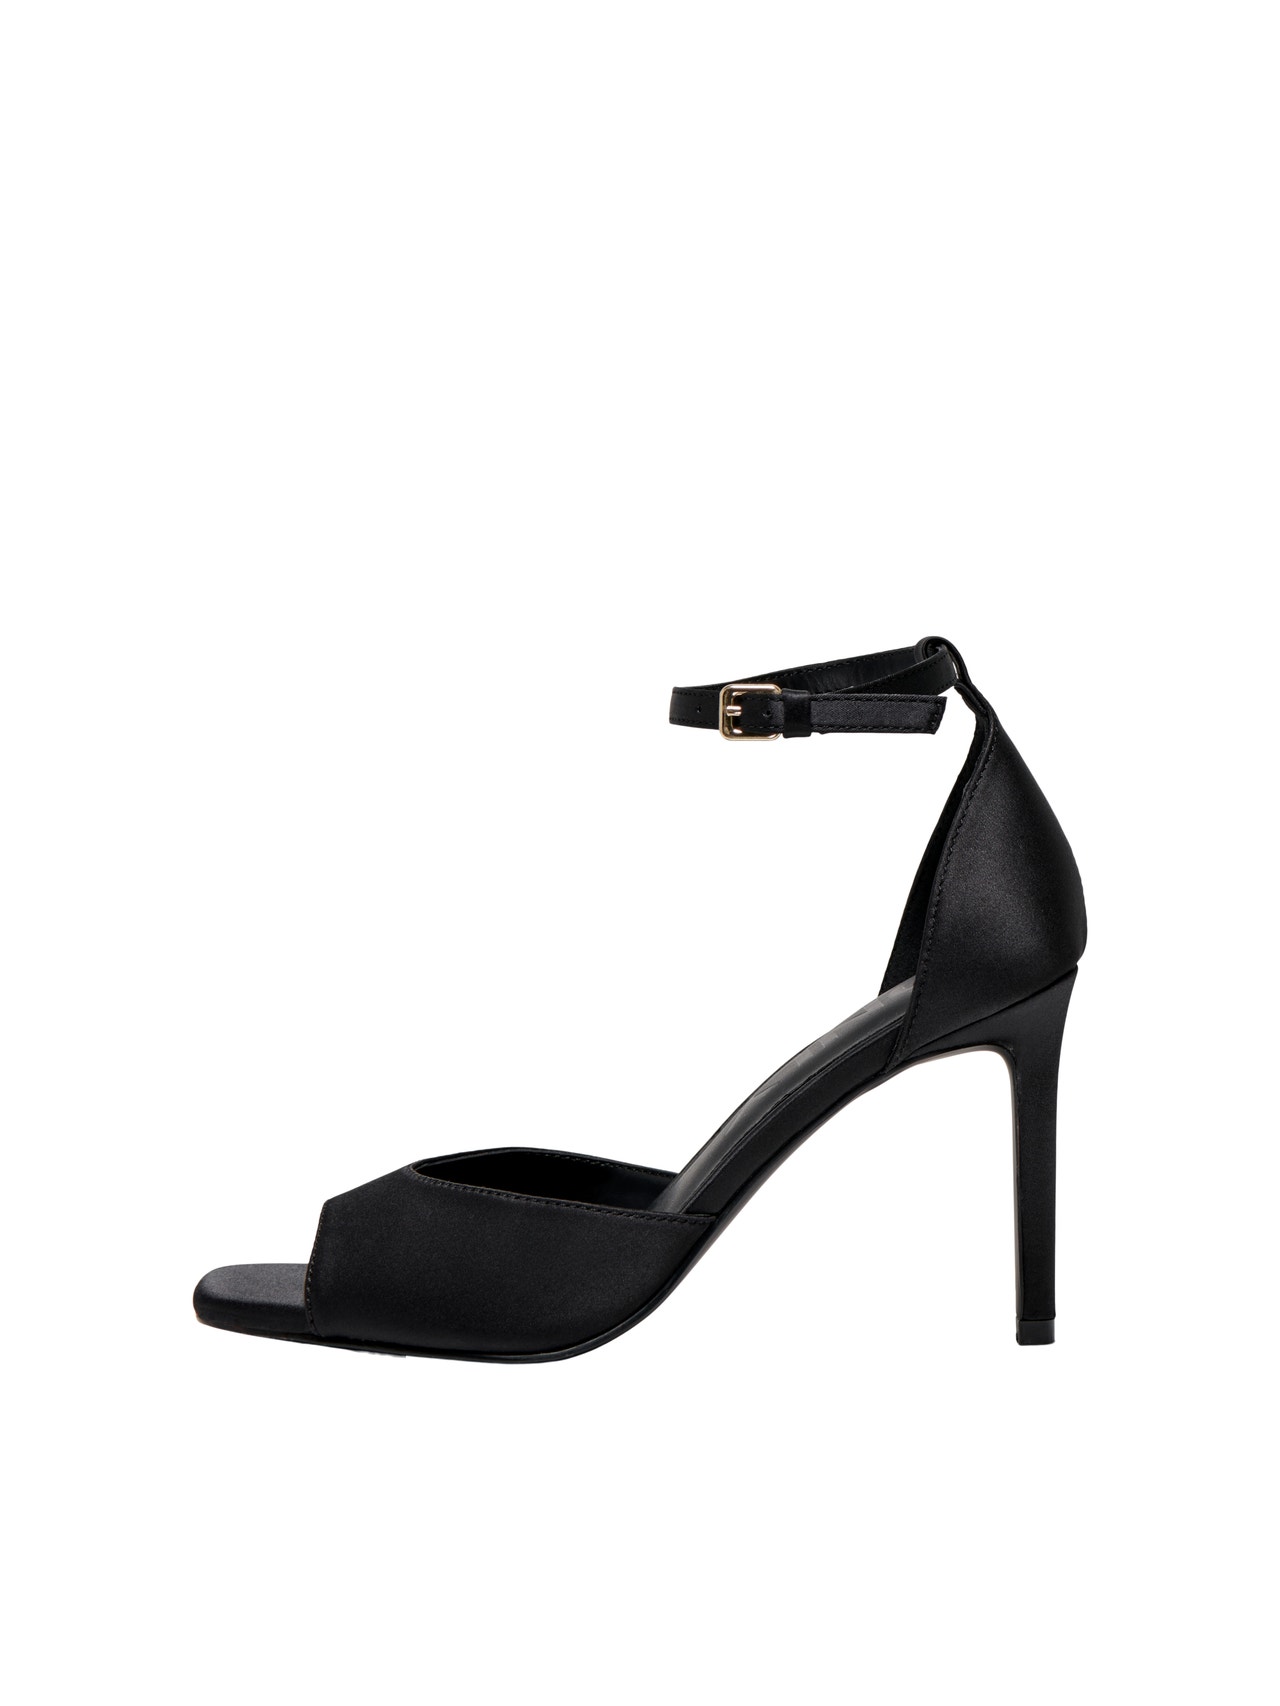 ONLY Stilettos with open toe -Black - 15304393